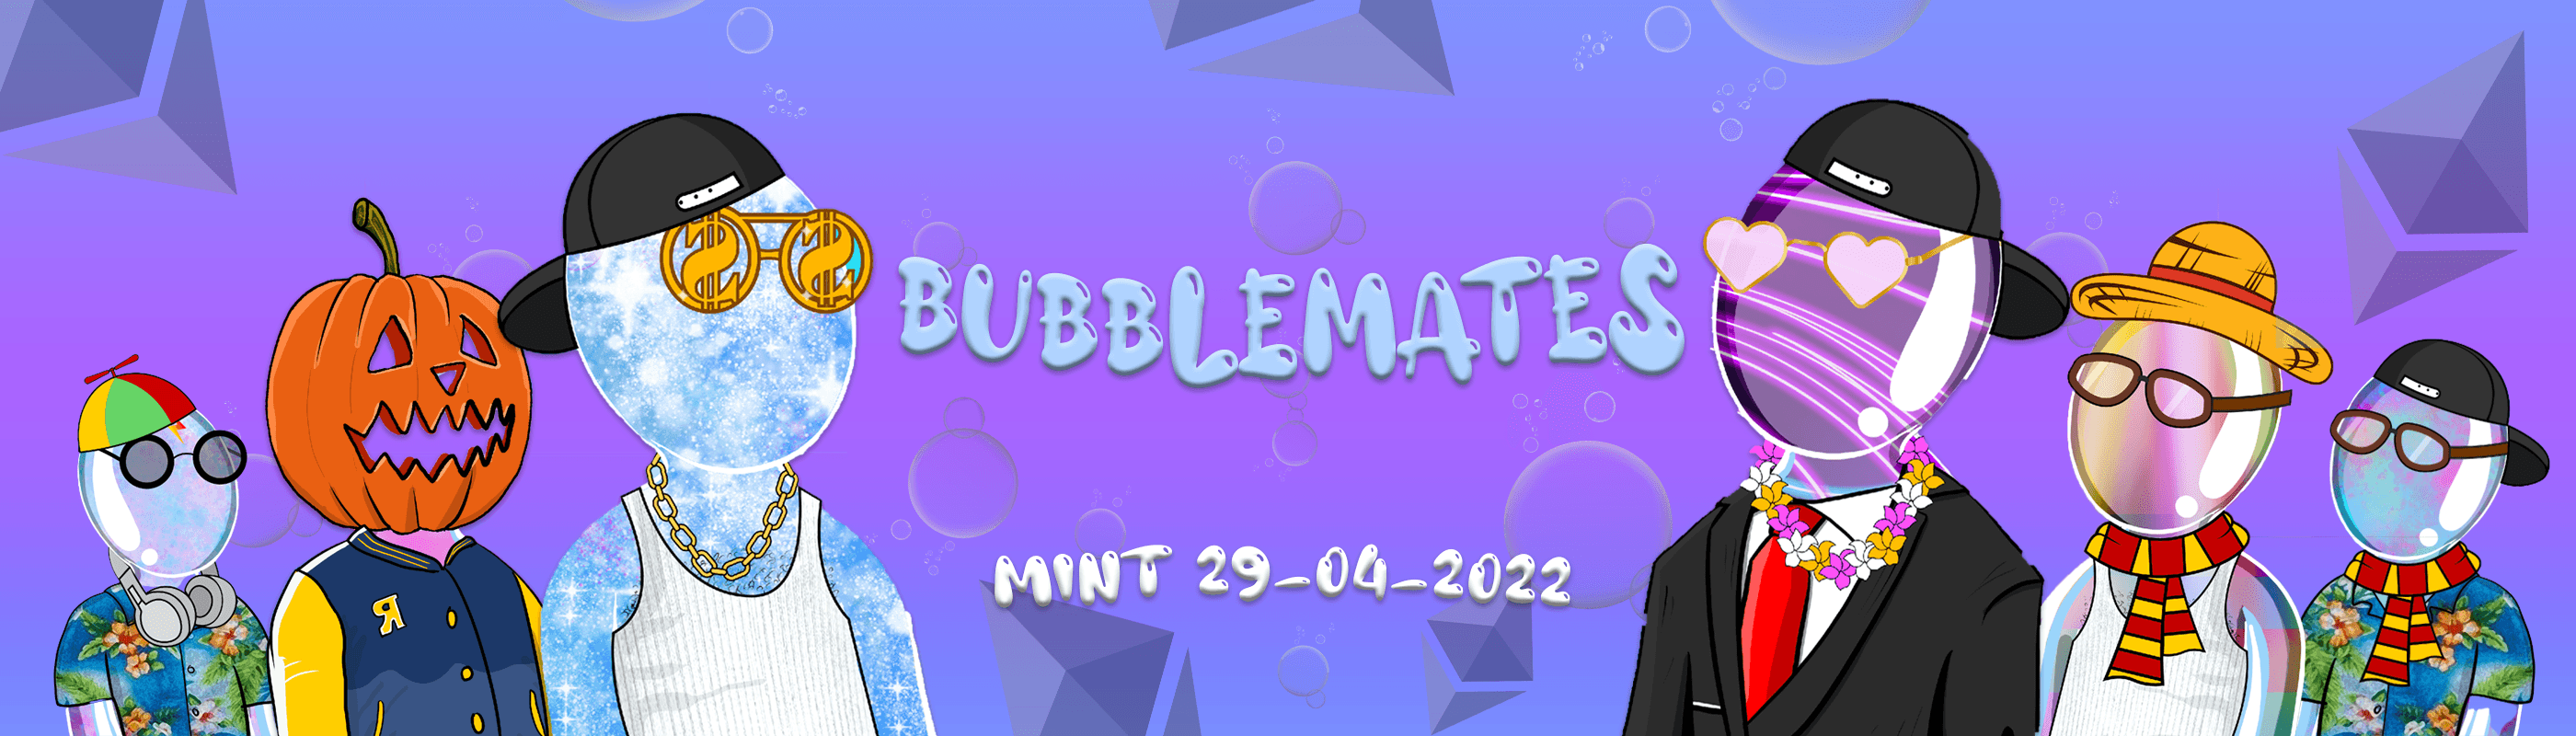 Bubblemates 横幅